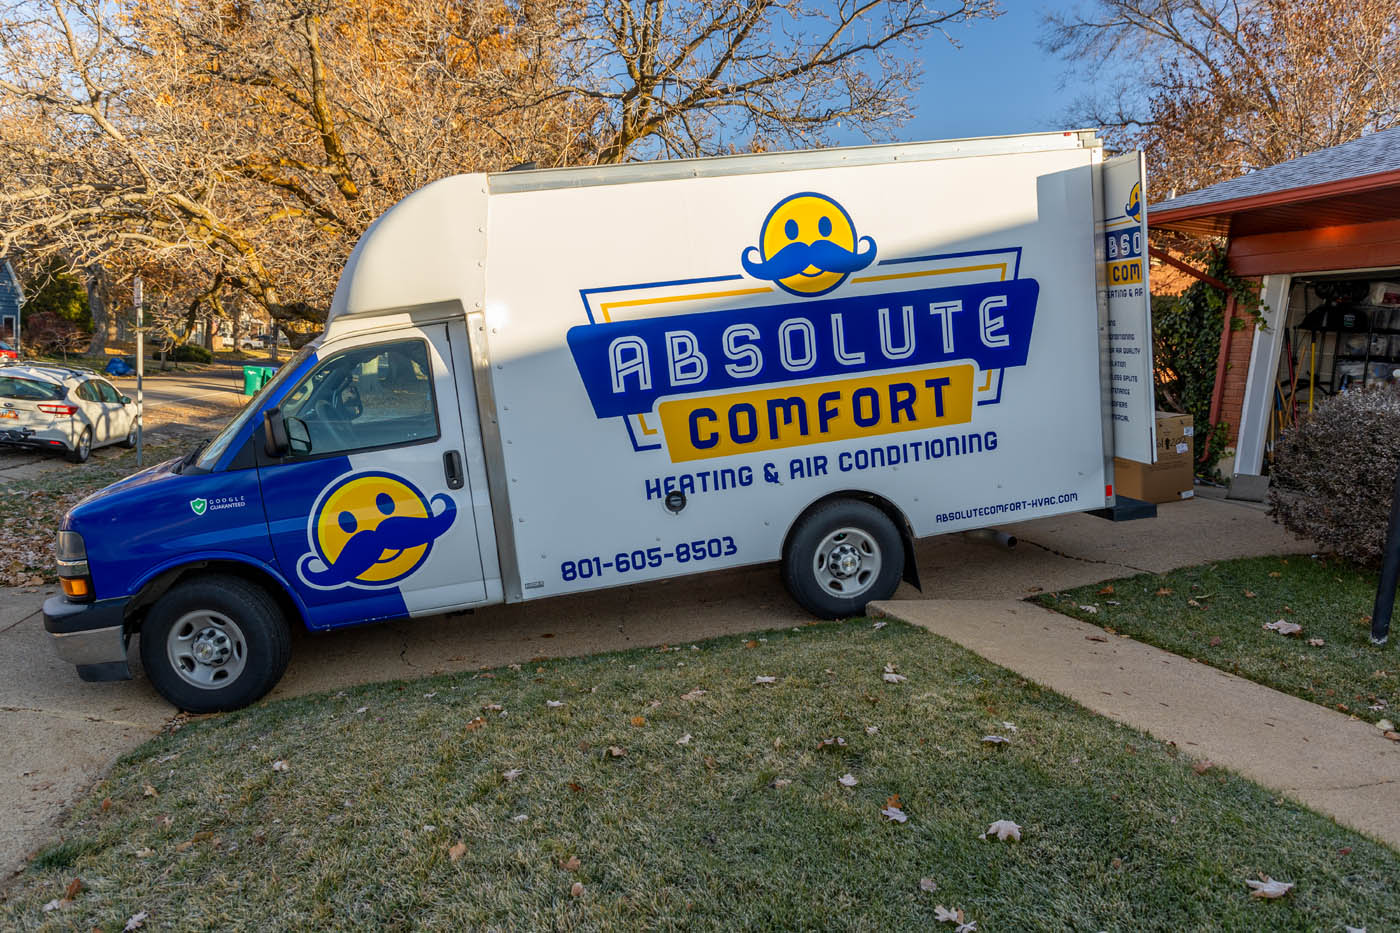 An Absolute Comfort truck - we offer premier services for heating and ac.